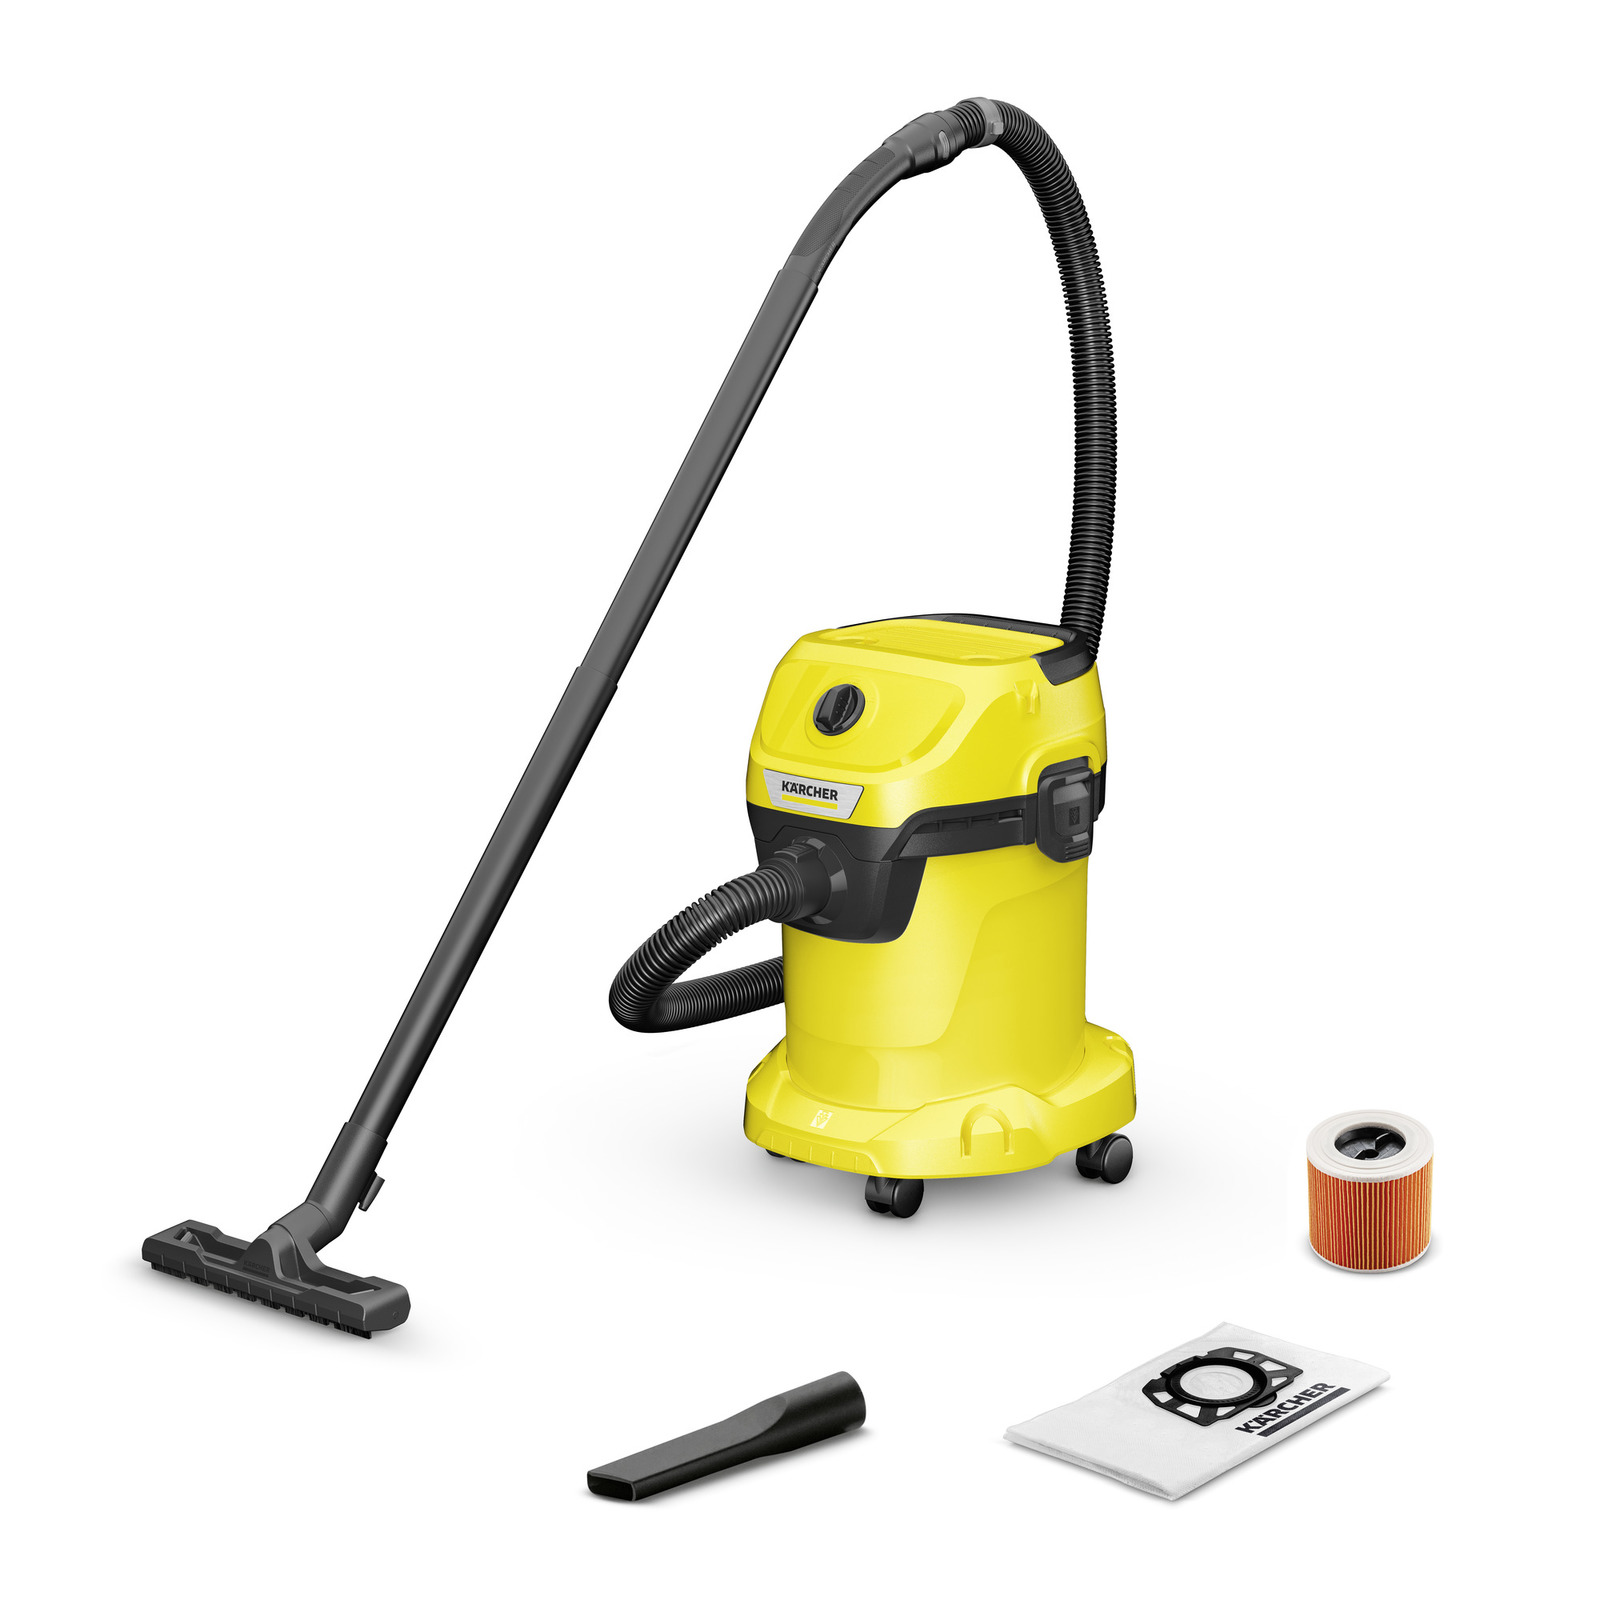 Kärcher vacuum cleaner SE 4001, yellow/black - High pressure cleaners -  Photopoint